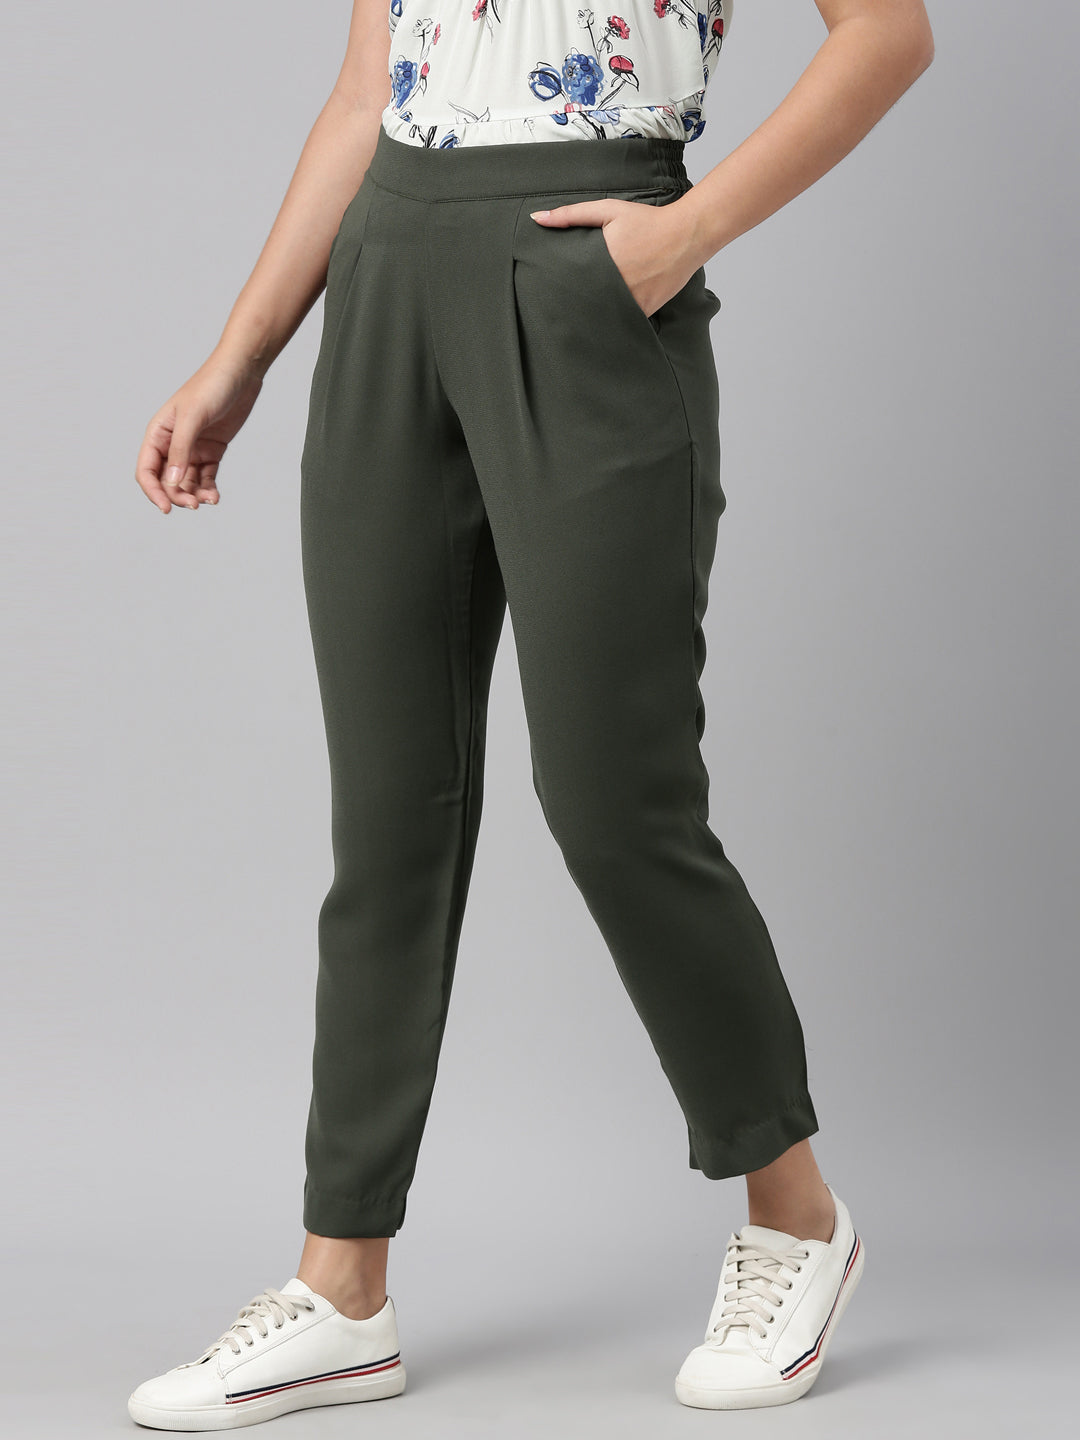 Xpose Trousers and Pants  Buy Xpose Women Olive Comfort Straight Slim Fit  High Rise Trousers Online  Nykaa Fashion